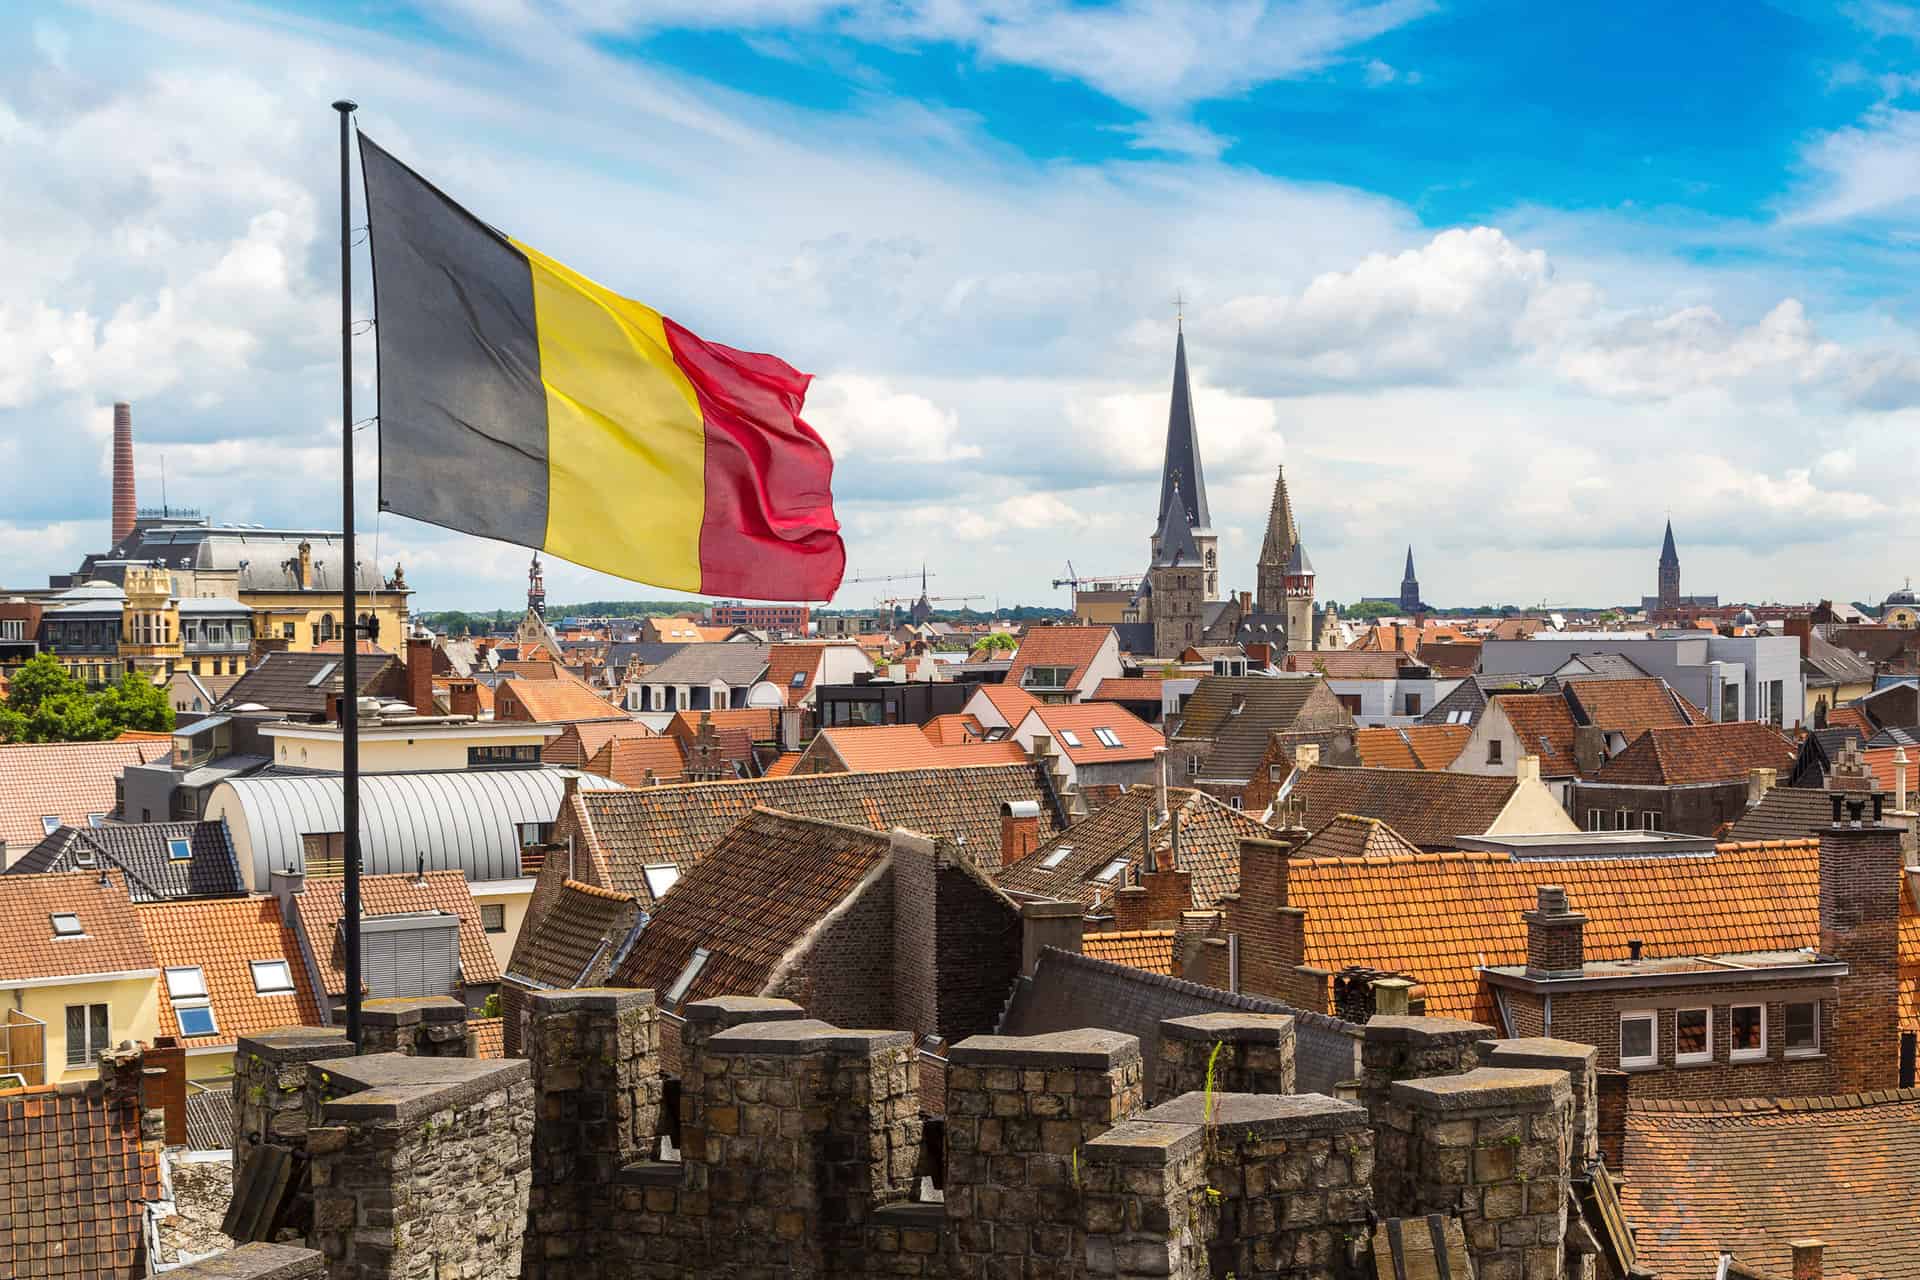 Things you didn't know about Belgium - Top 10 interesting facts about Belgium